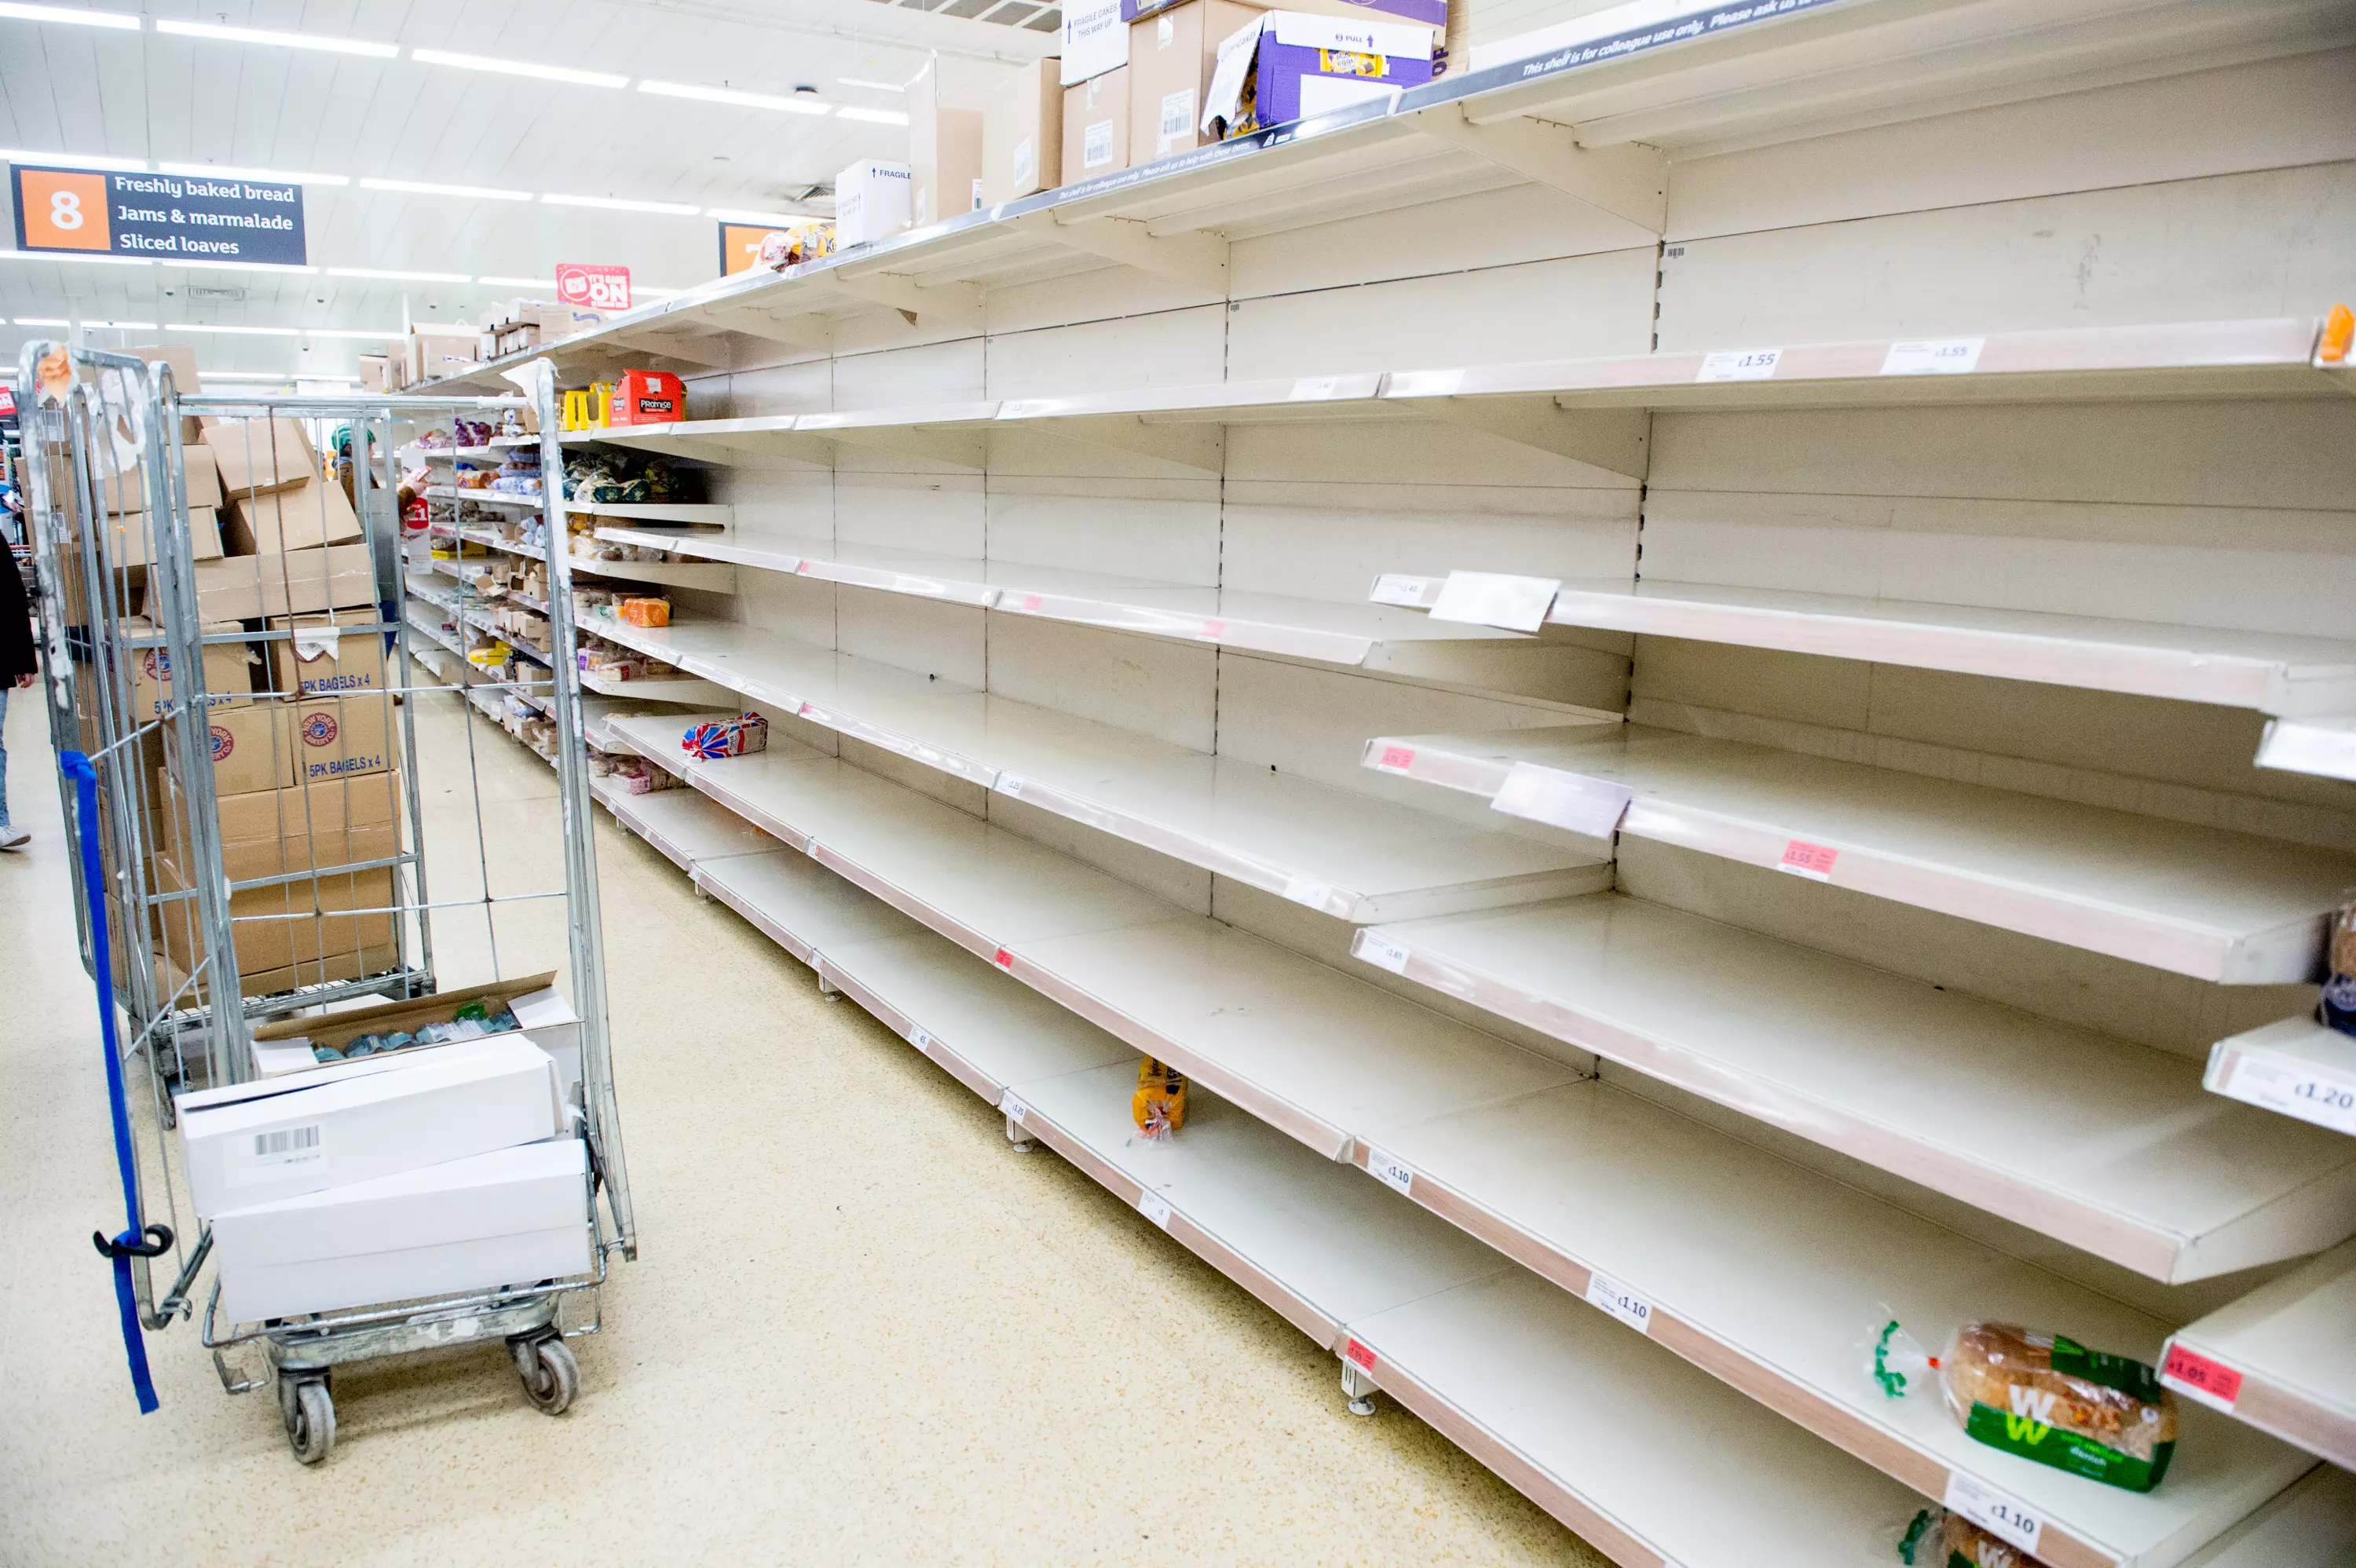 Supermarkets have been stripped bare of essential foods and toiletries.